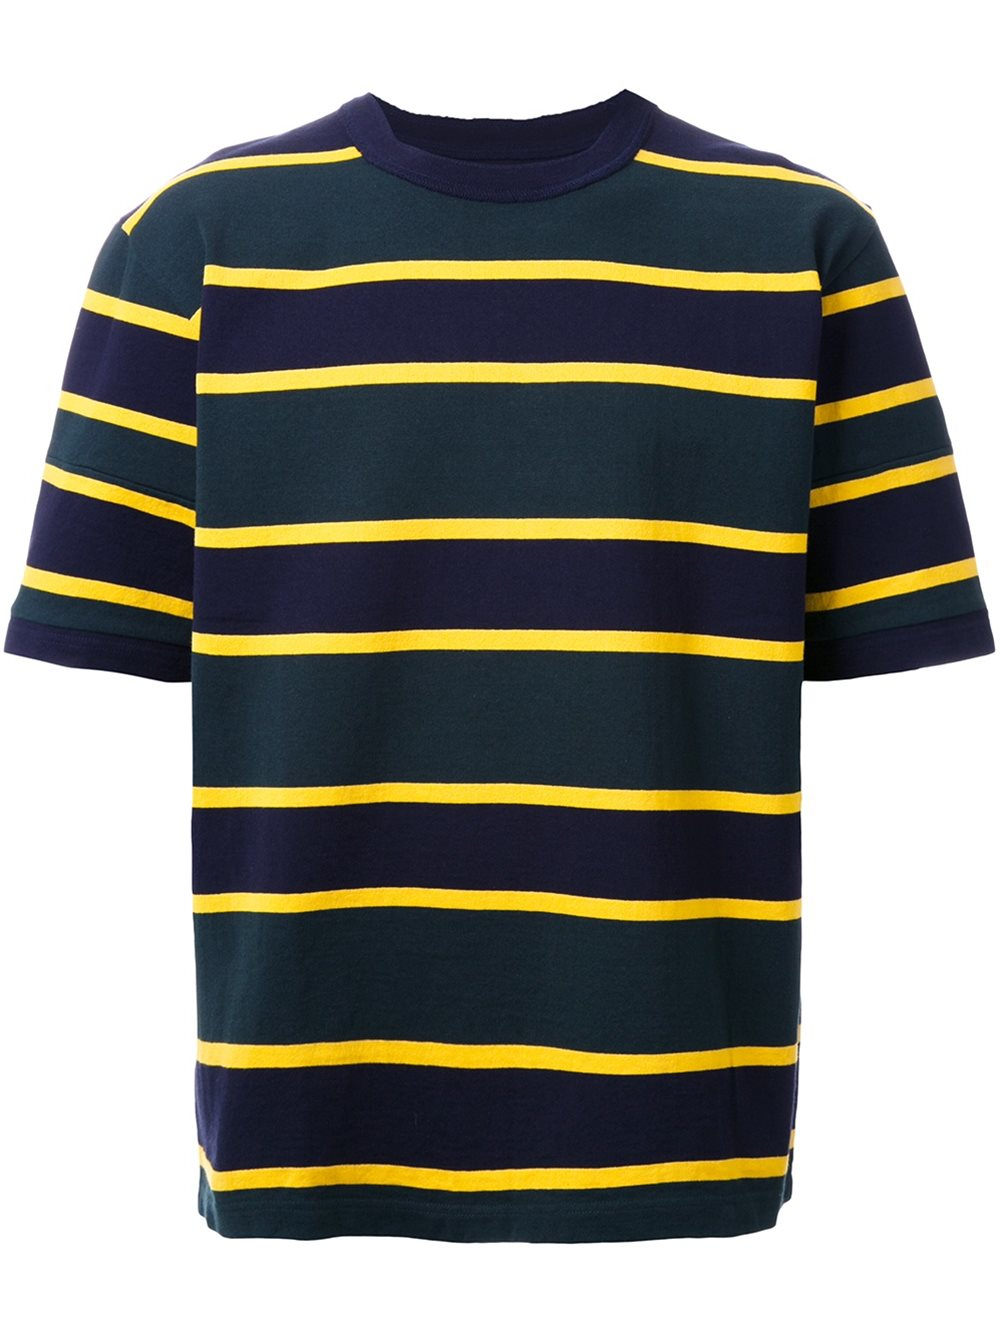 Lyst - Sacai Striped T-shirt in Yellow for Men